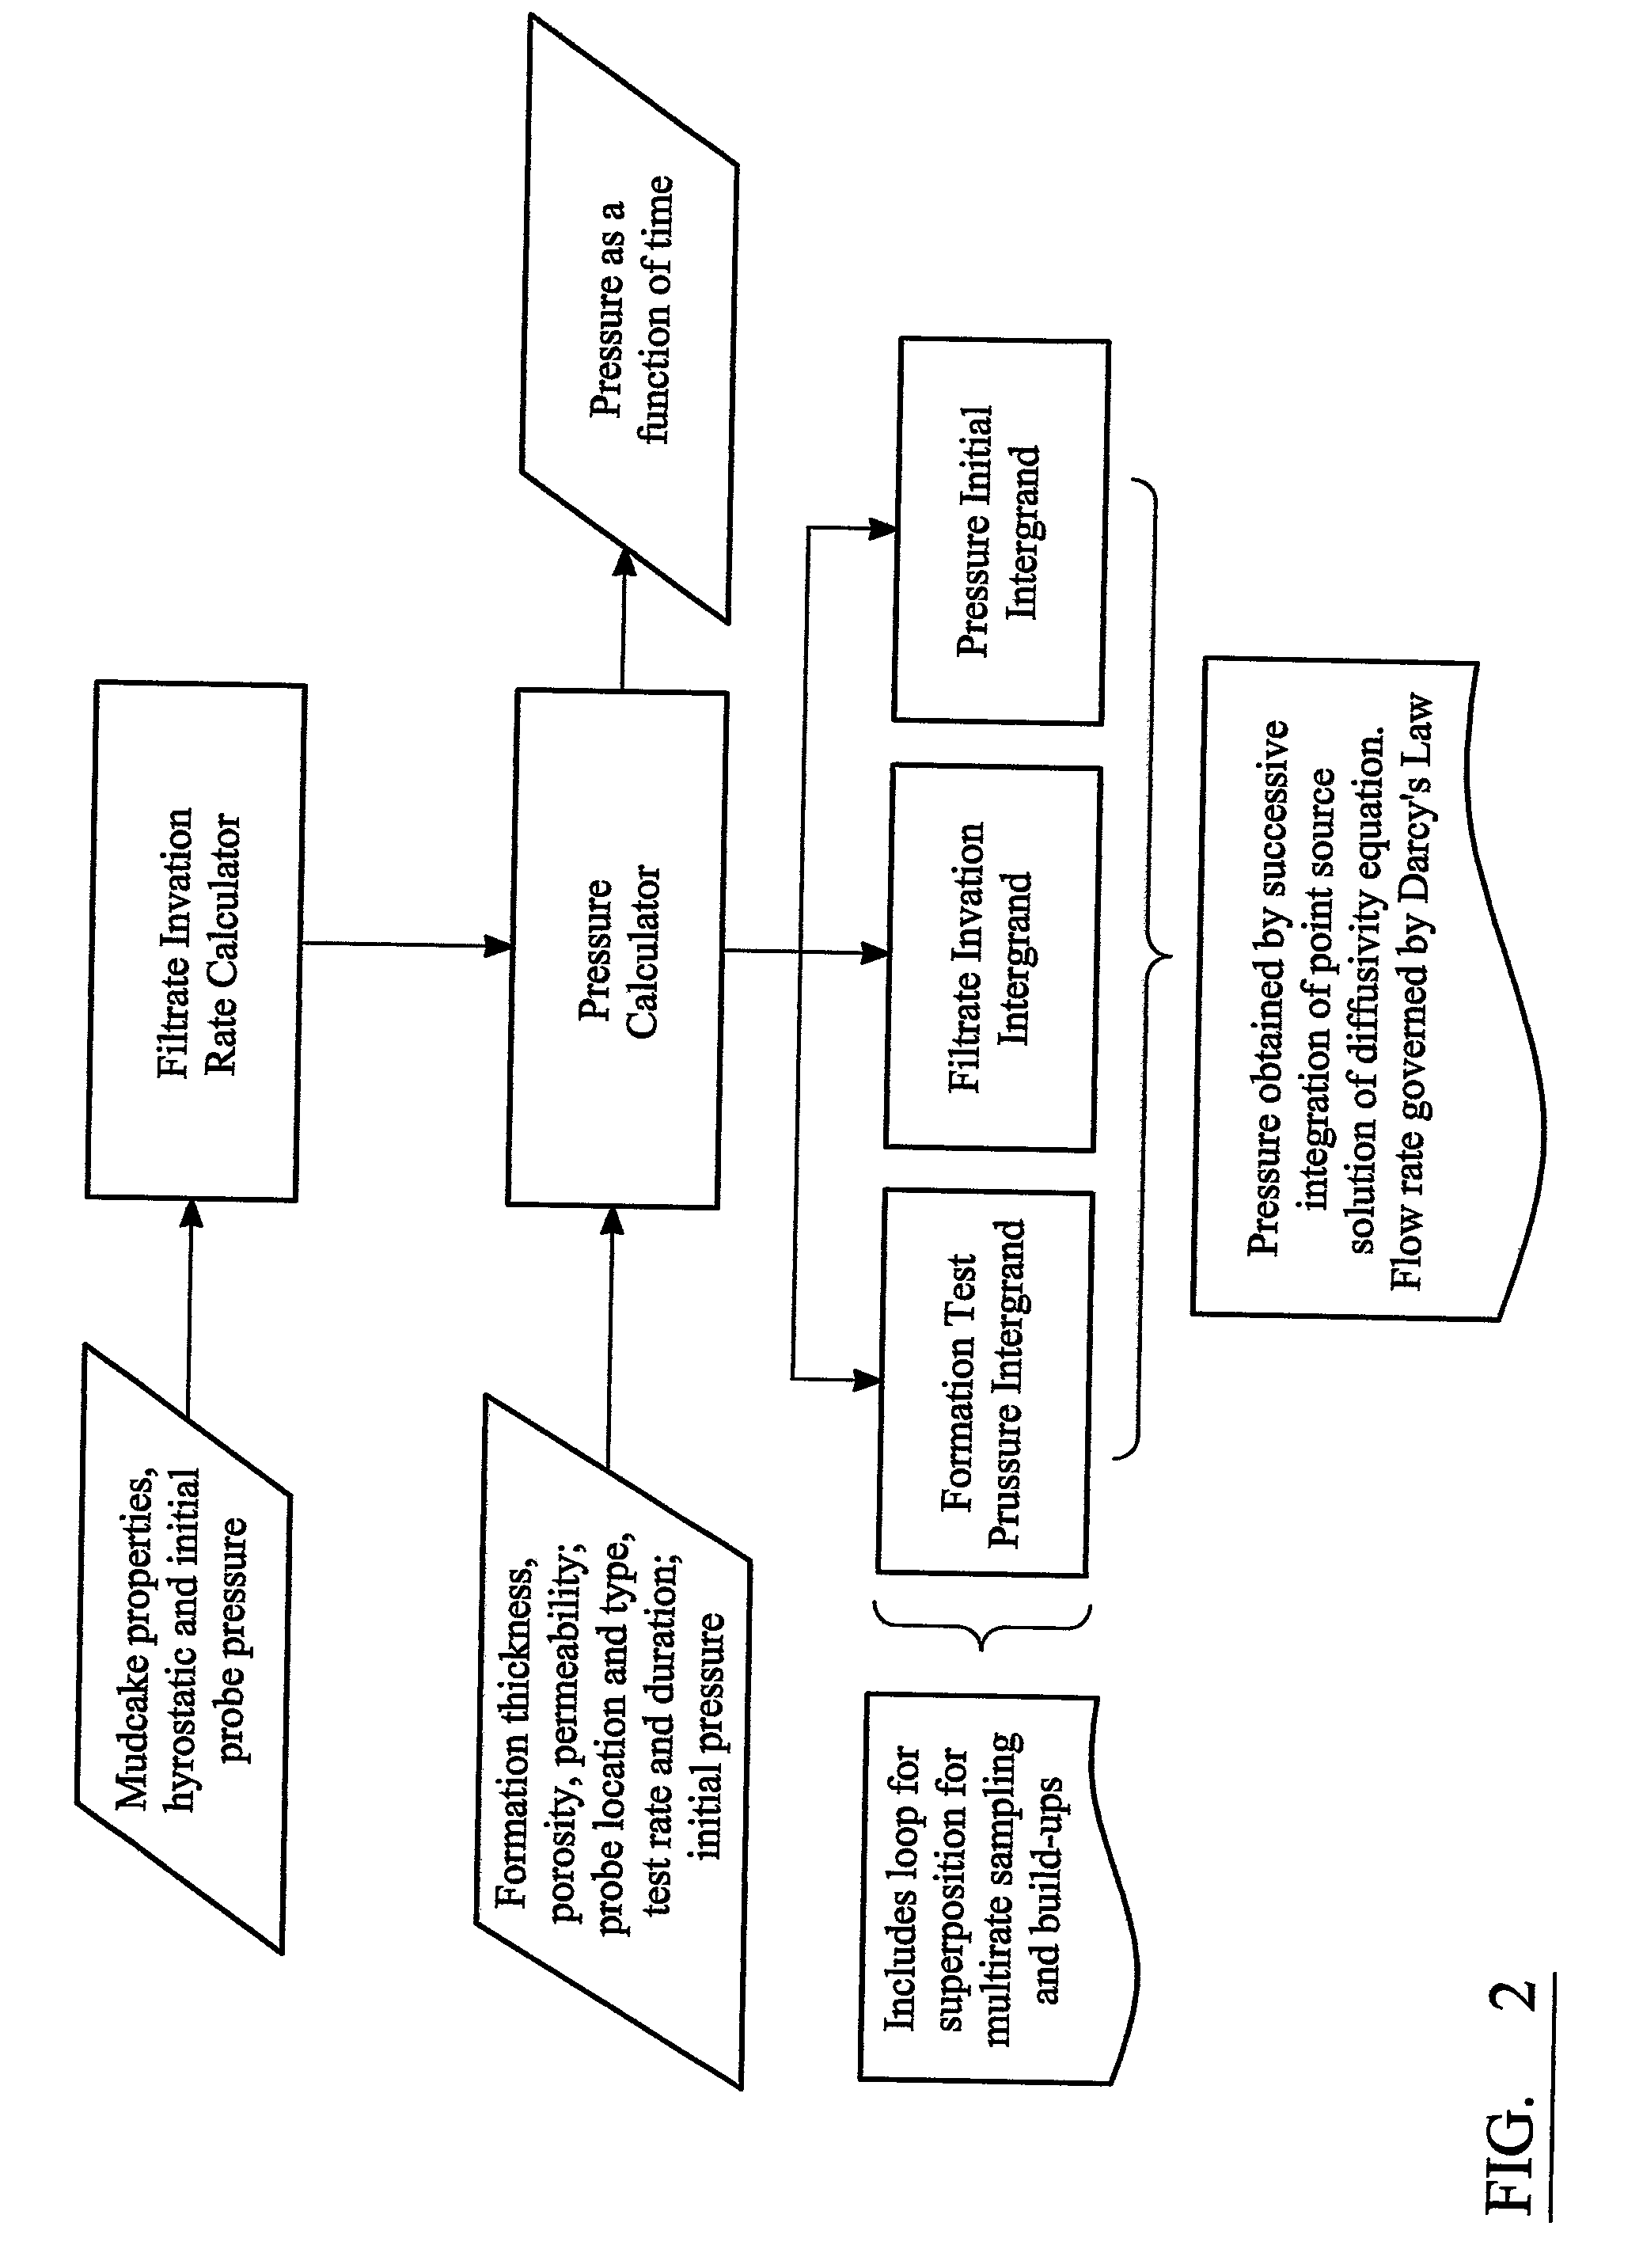 Method for analysis of pressure response in underground formations